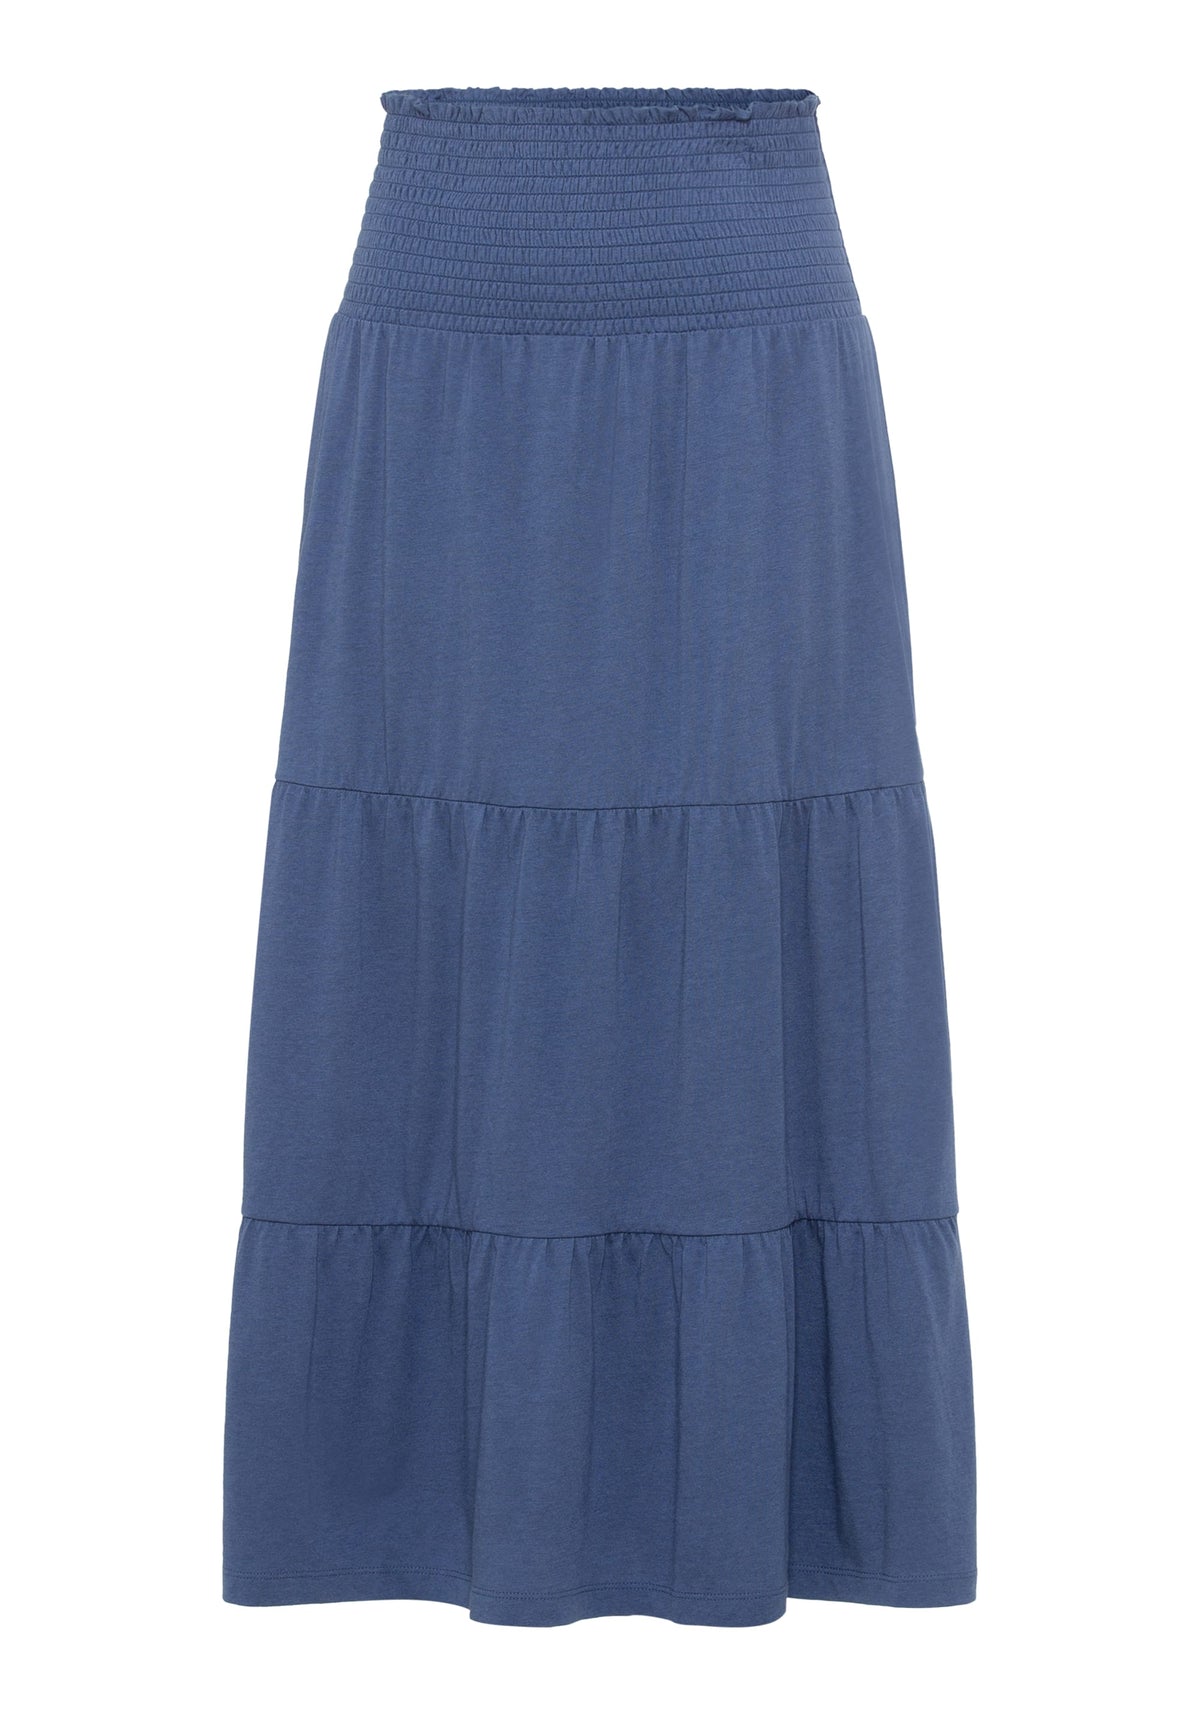 Cotton Blend Tiered Maxi Skirt containing TENCEL™ Modal